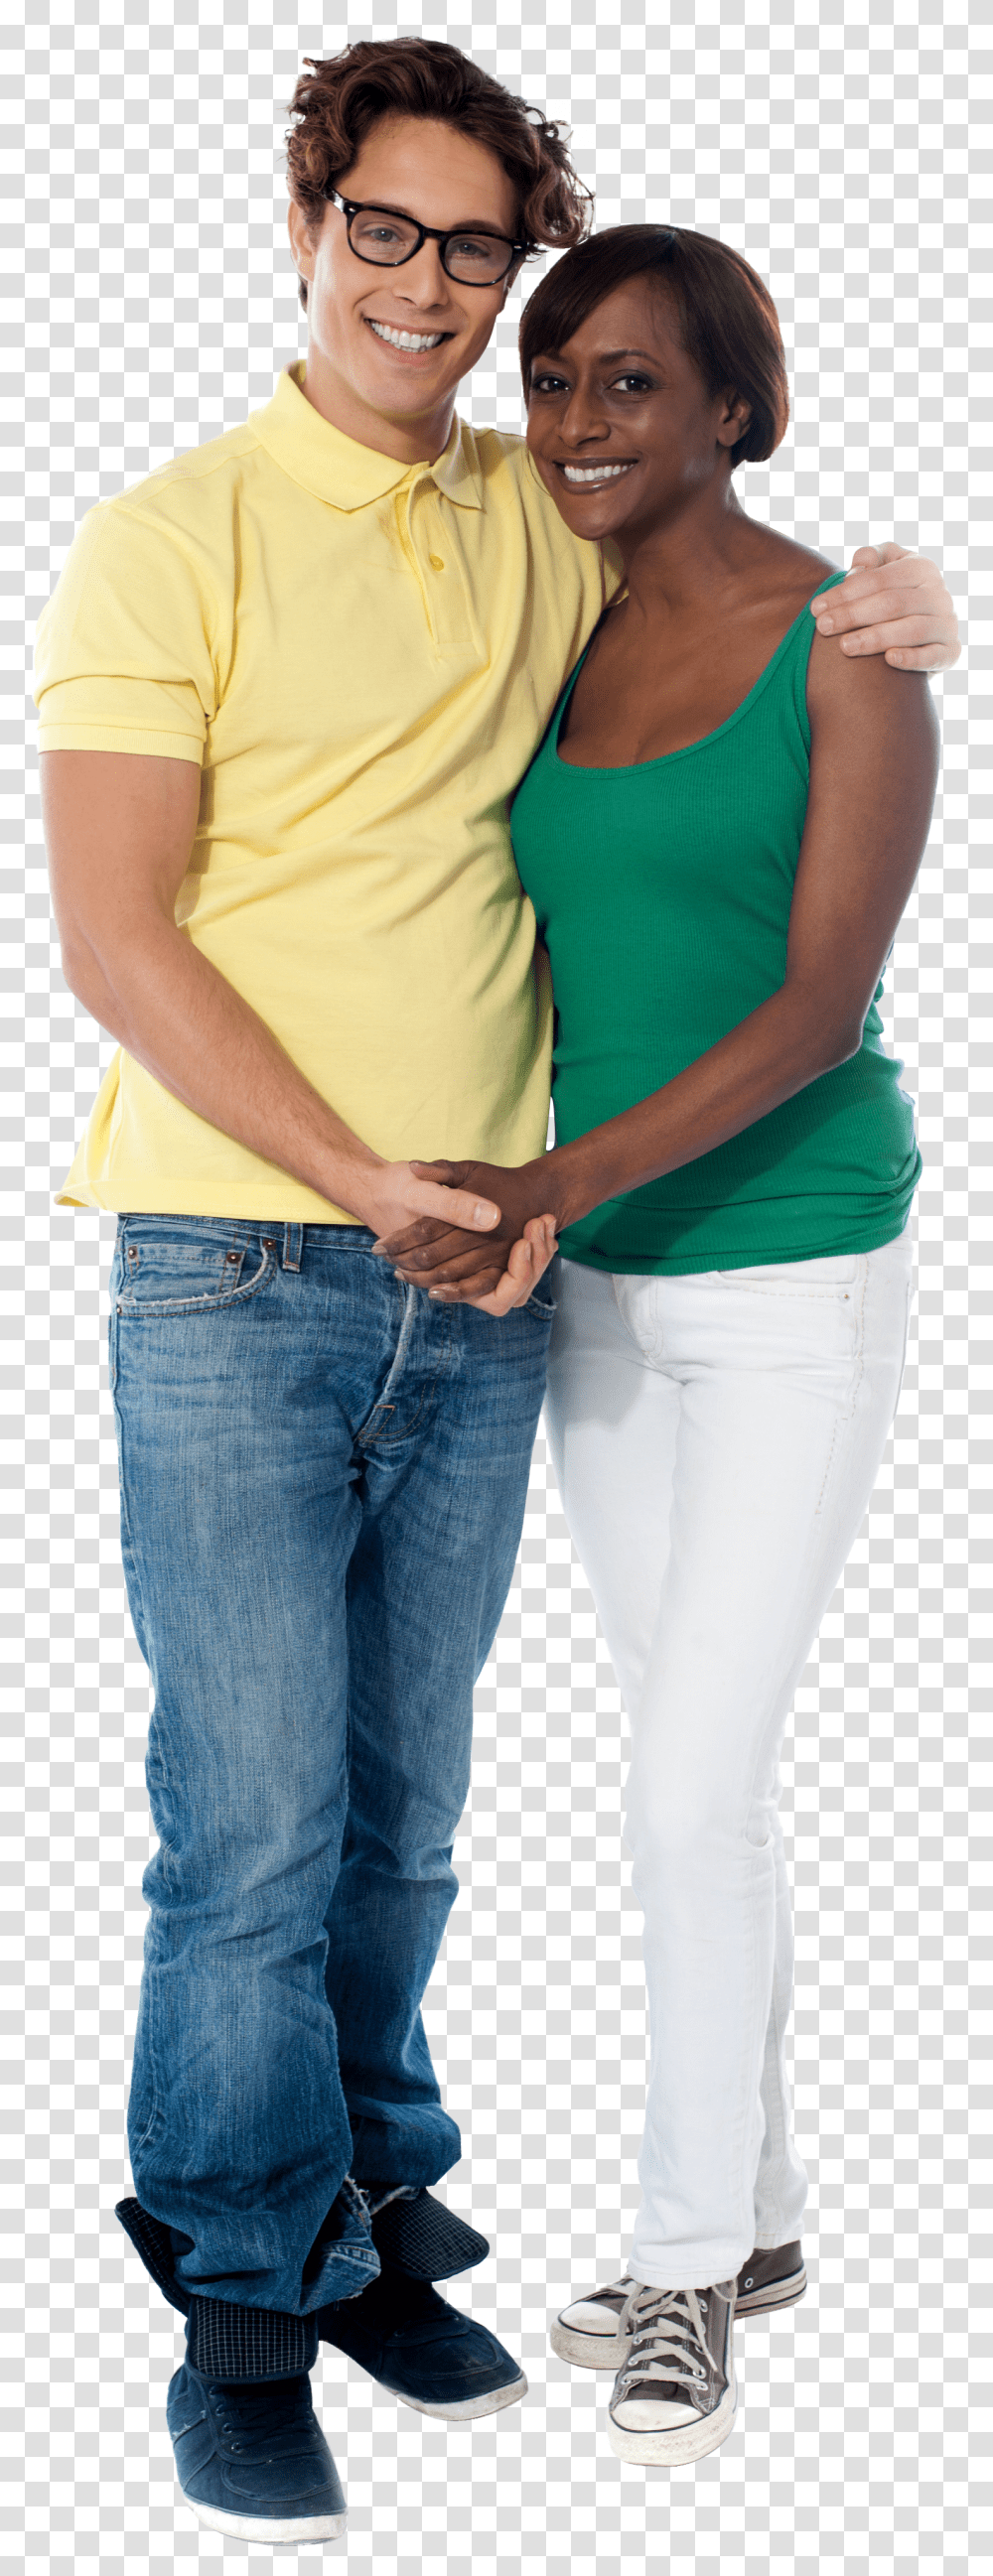 Happy Couple Royalty Free Image Happy Couple Background Transparent Png